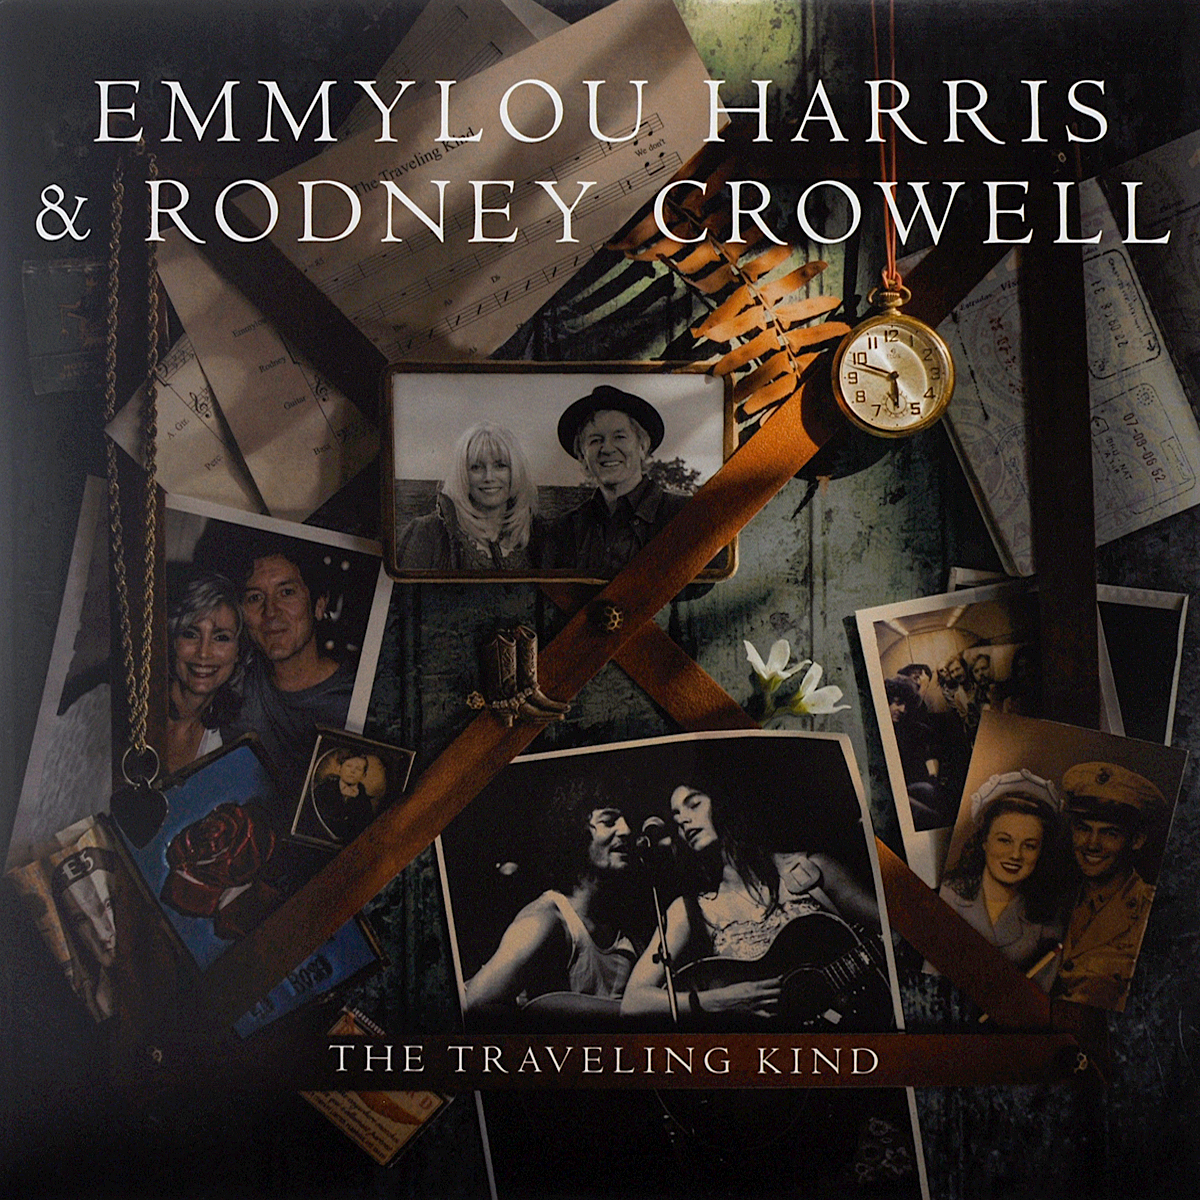 The traveling kind. Harris Emmylou "Red Dirt girl".